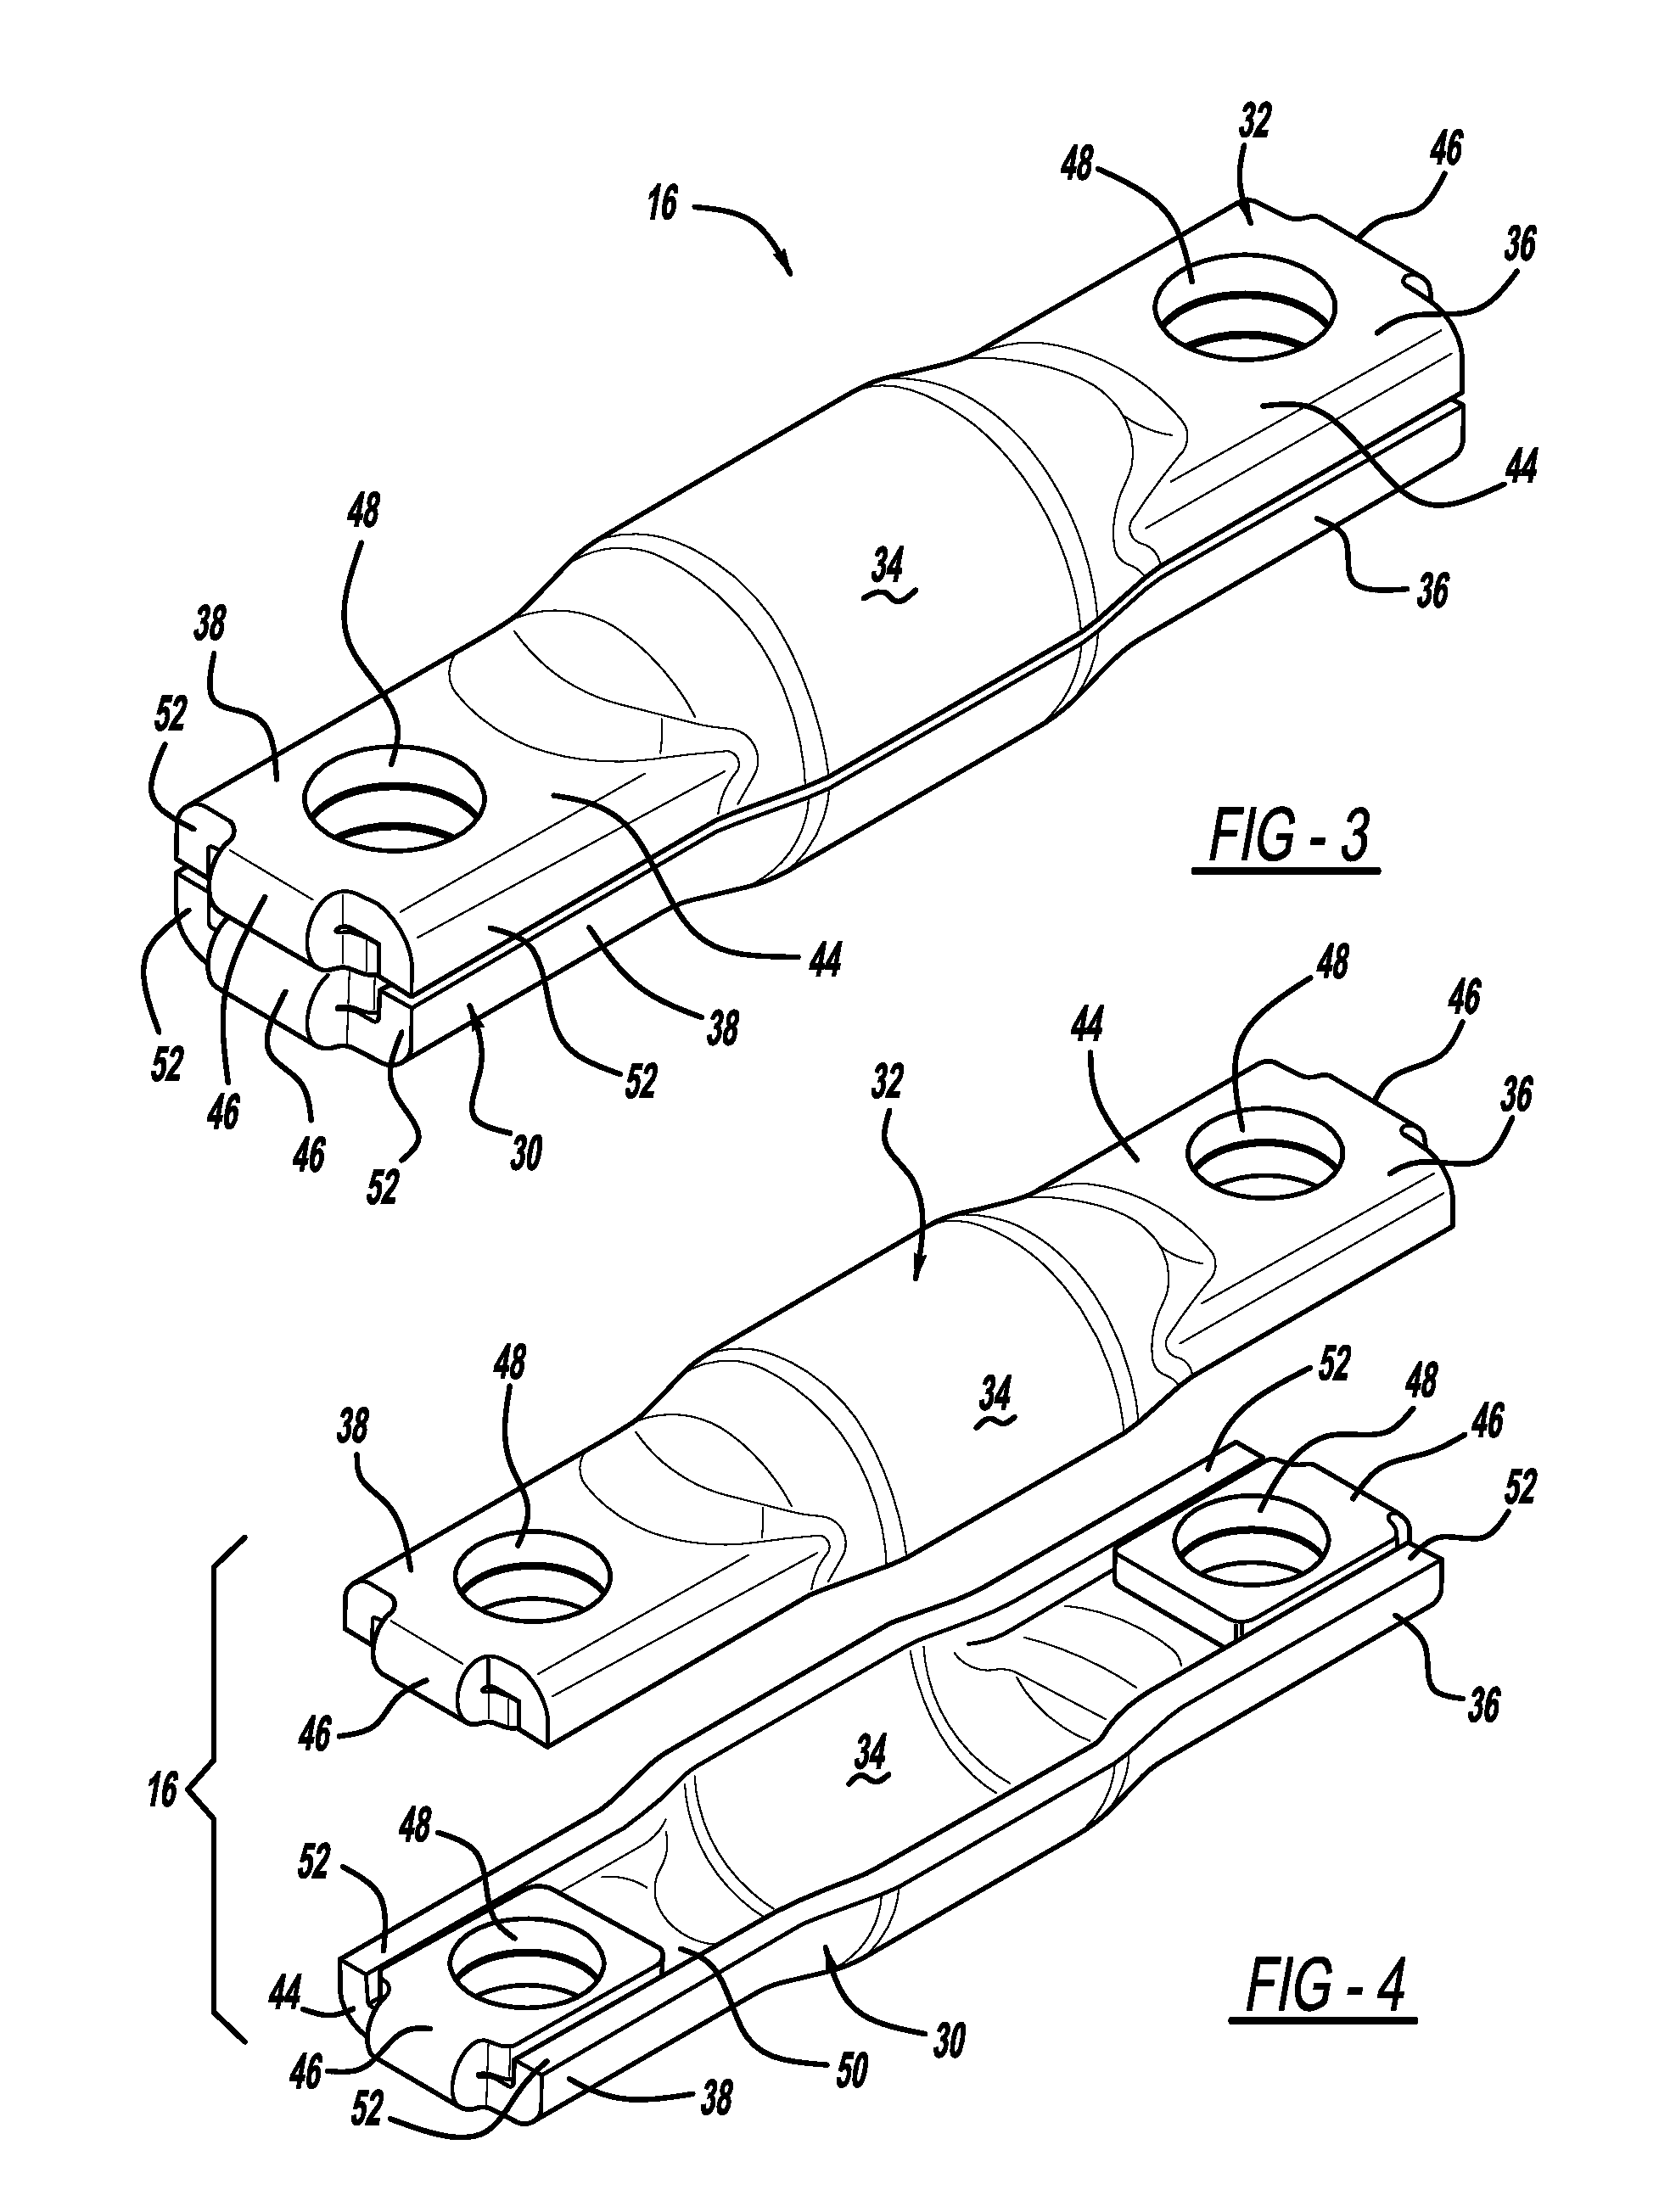 Elastomeric bushing assembly with multi-piece bar pin